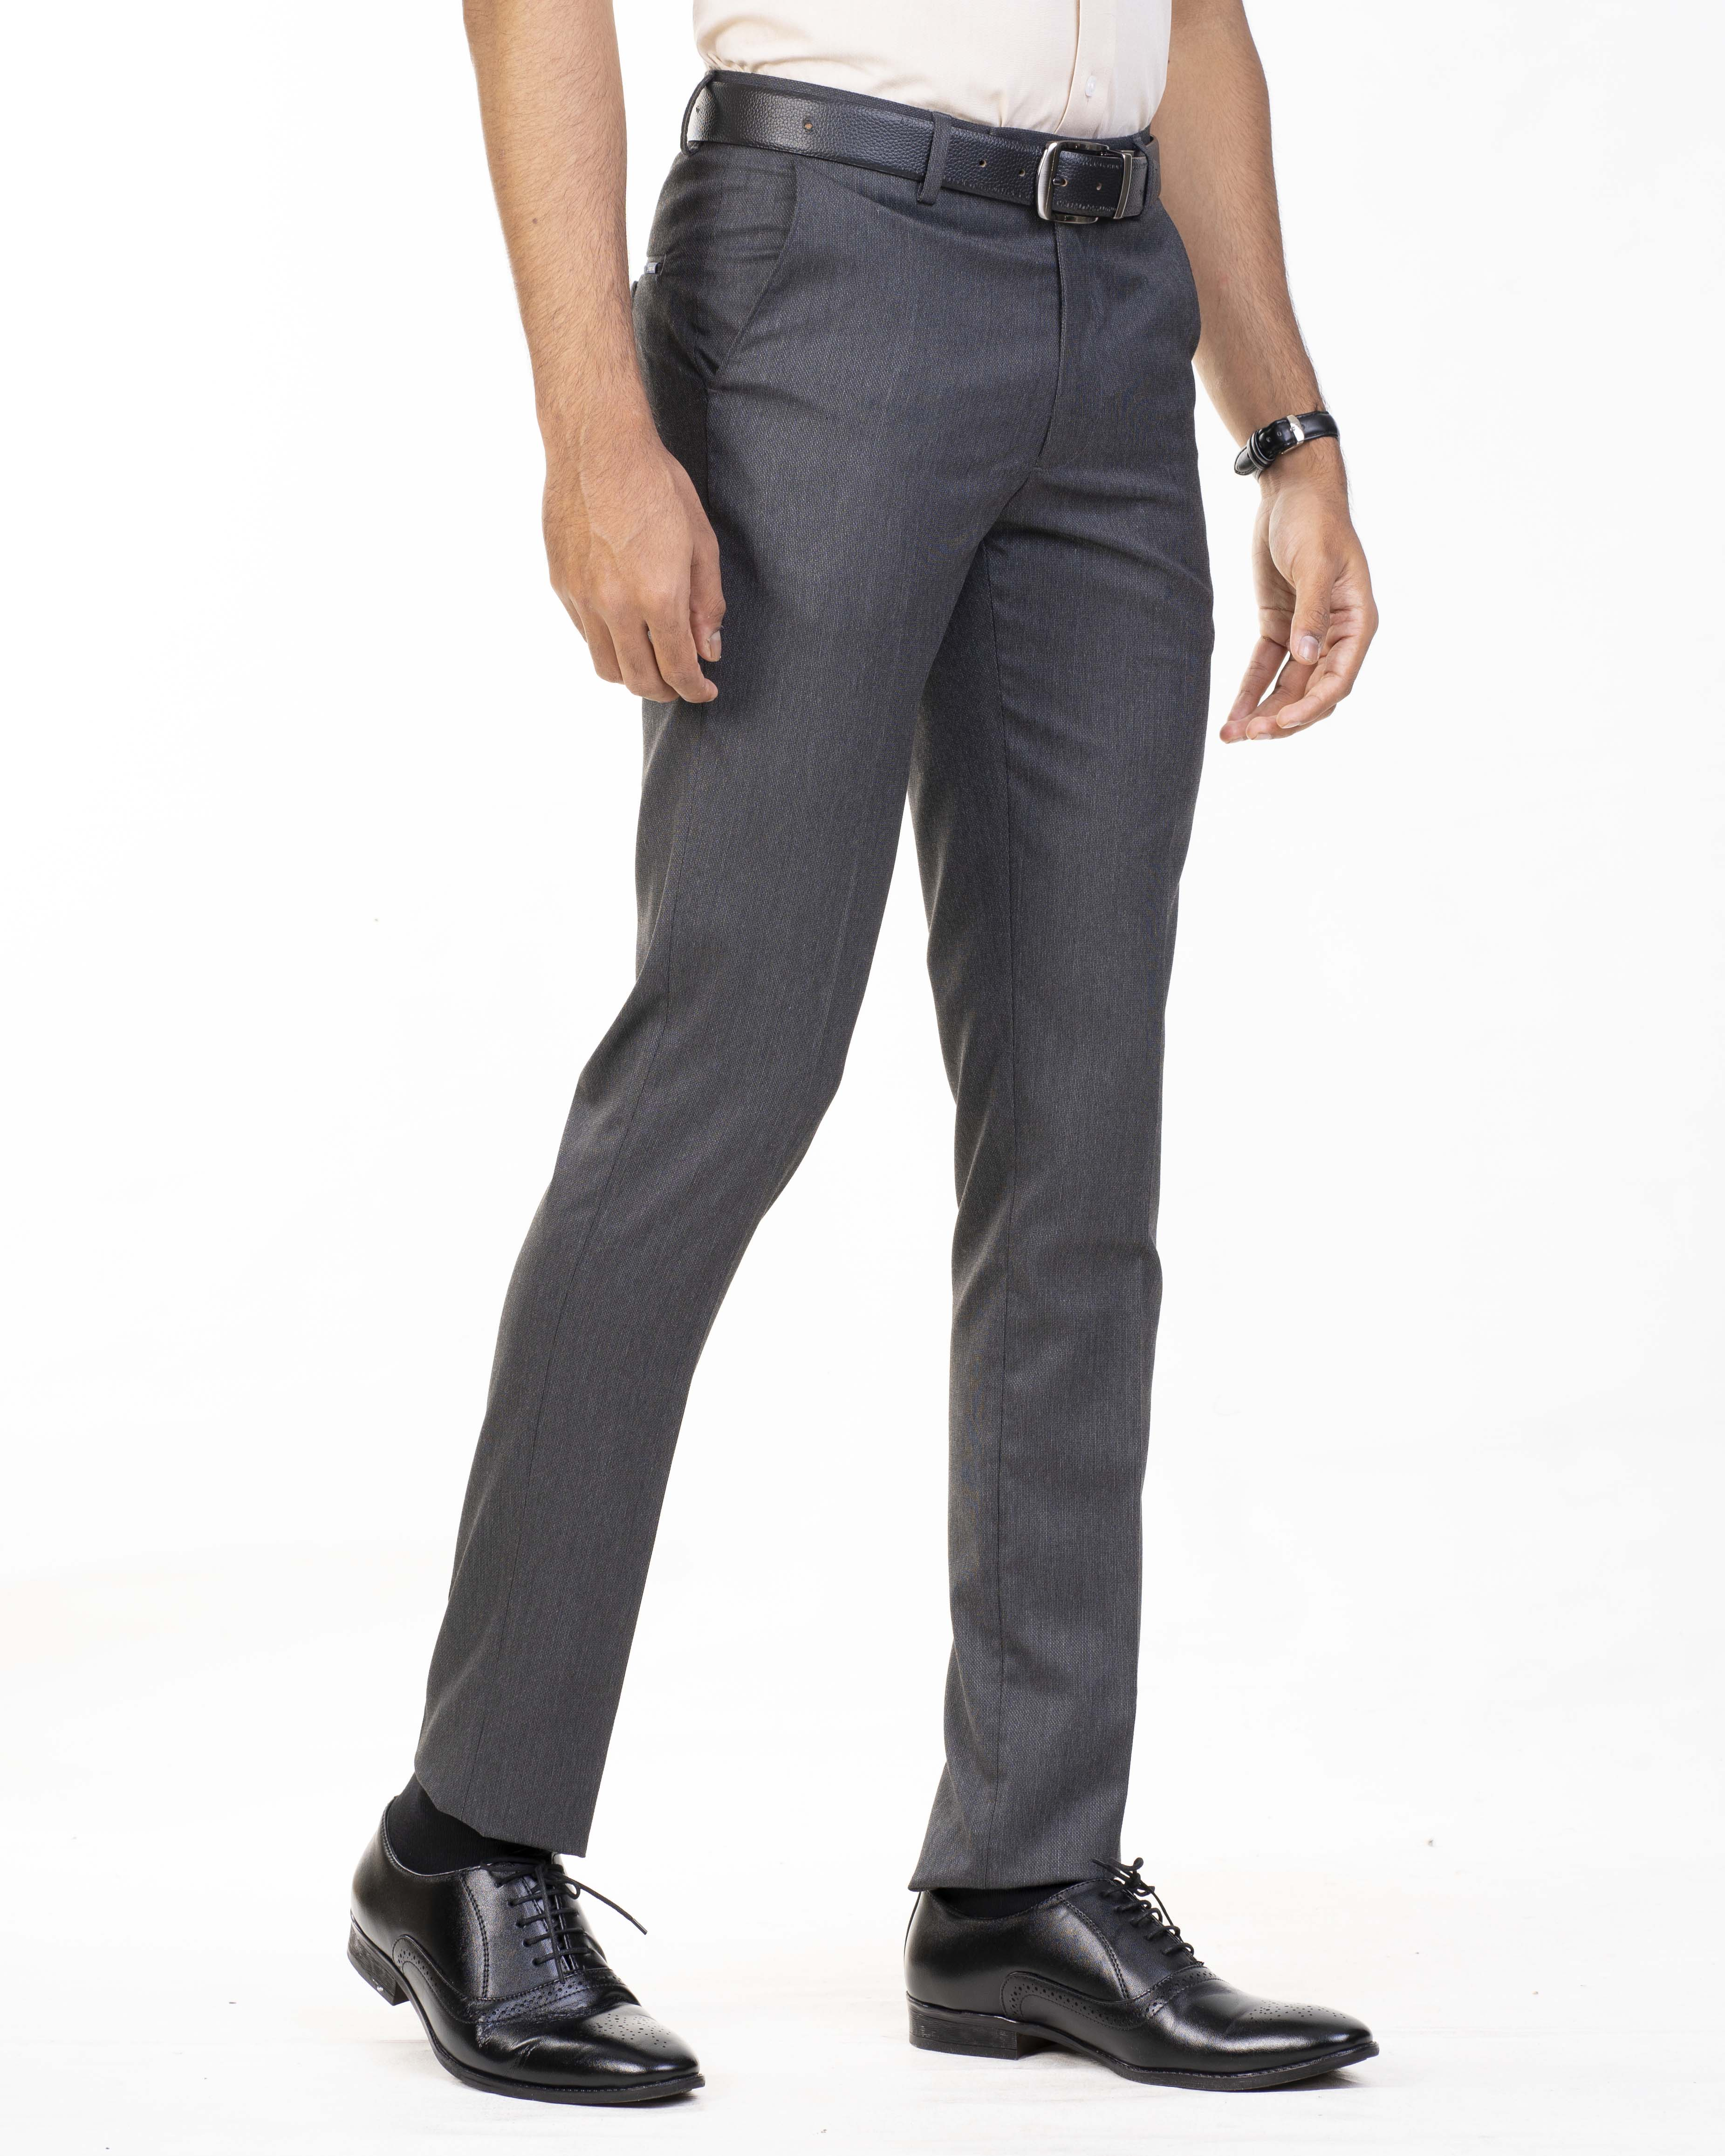 Emerald Trouser Dobby Class One Ultra Slim Fit-Charcoal